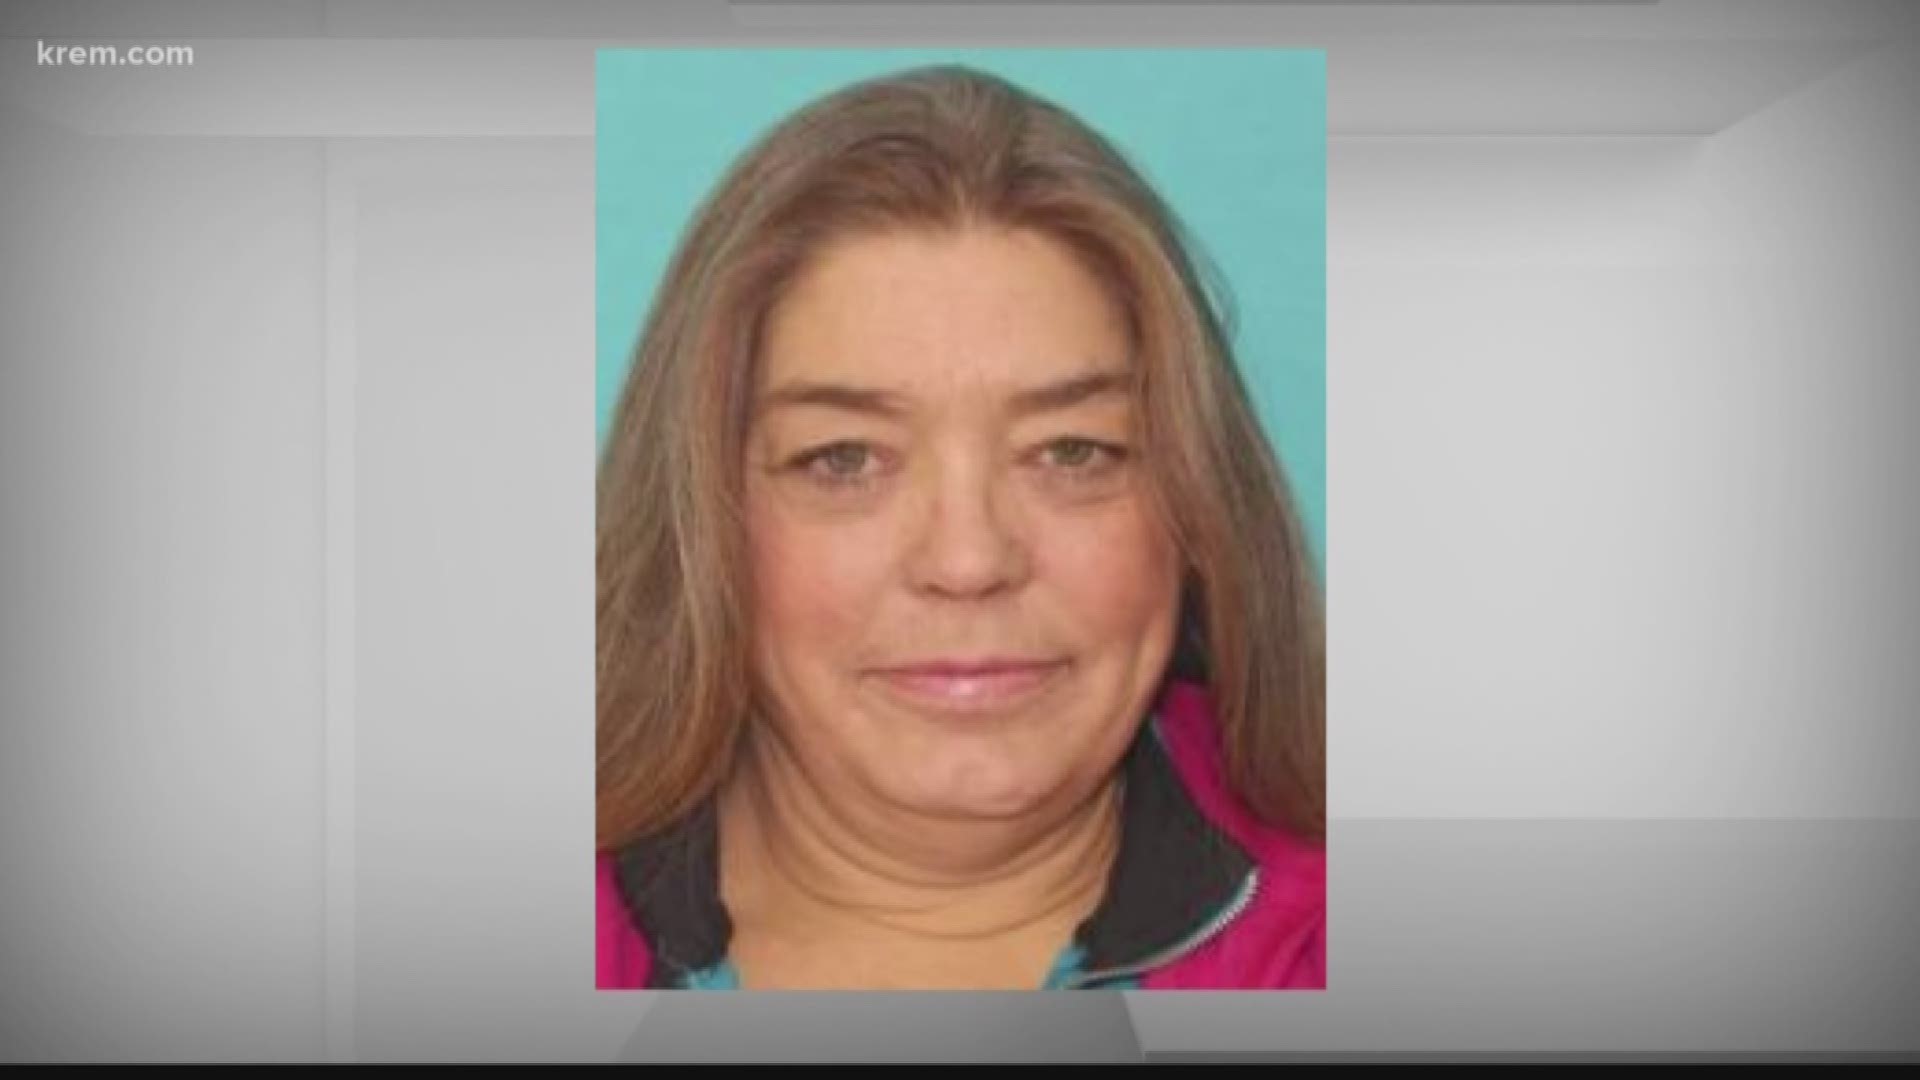 A North Idaho Family says they're looking for answers following the disappearance of a family member. It's been over two months since 54-year-old Rae Berwanger was seen.